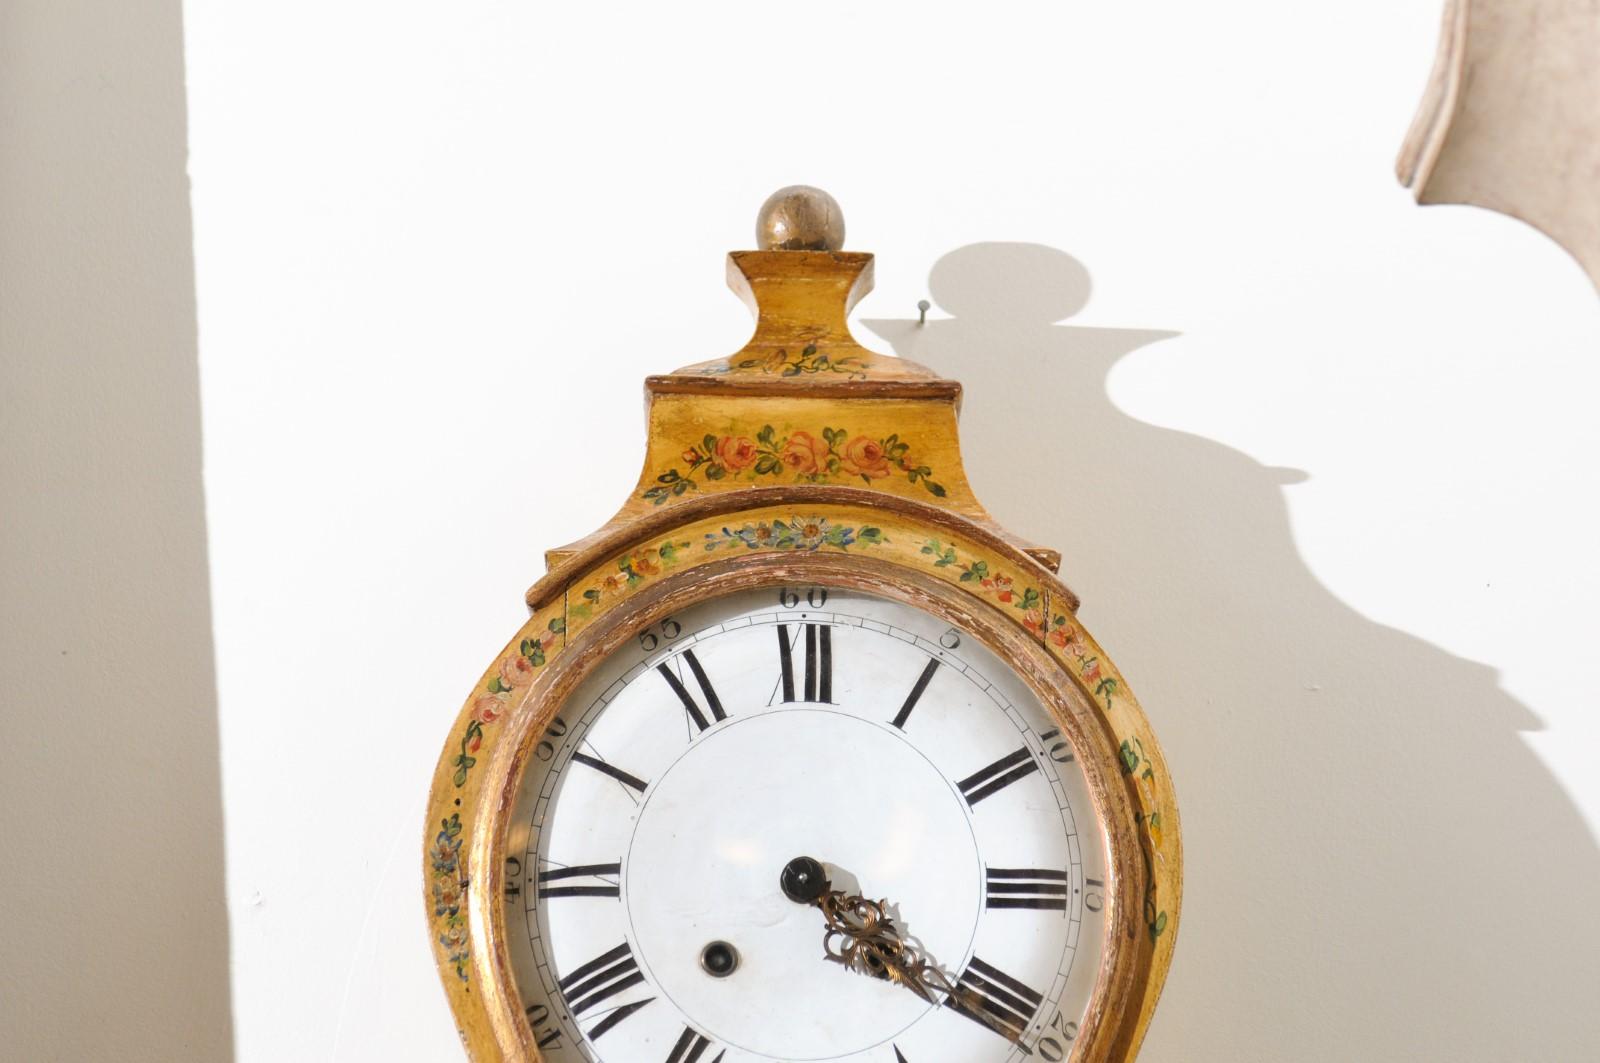 A French Rococo style three-piece tôle wall clock from the 19th century, with very rare original painted décor. Created in France during the 19th century, this tôle wall clock features a circular enameled face secured behind glass and showcasing